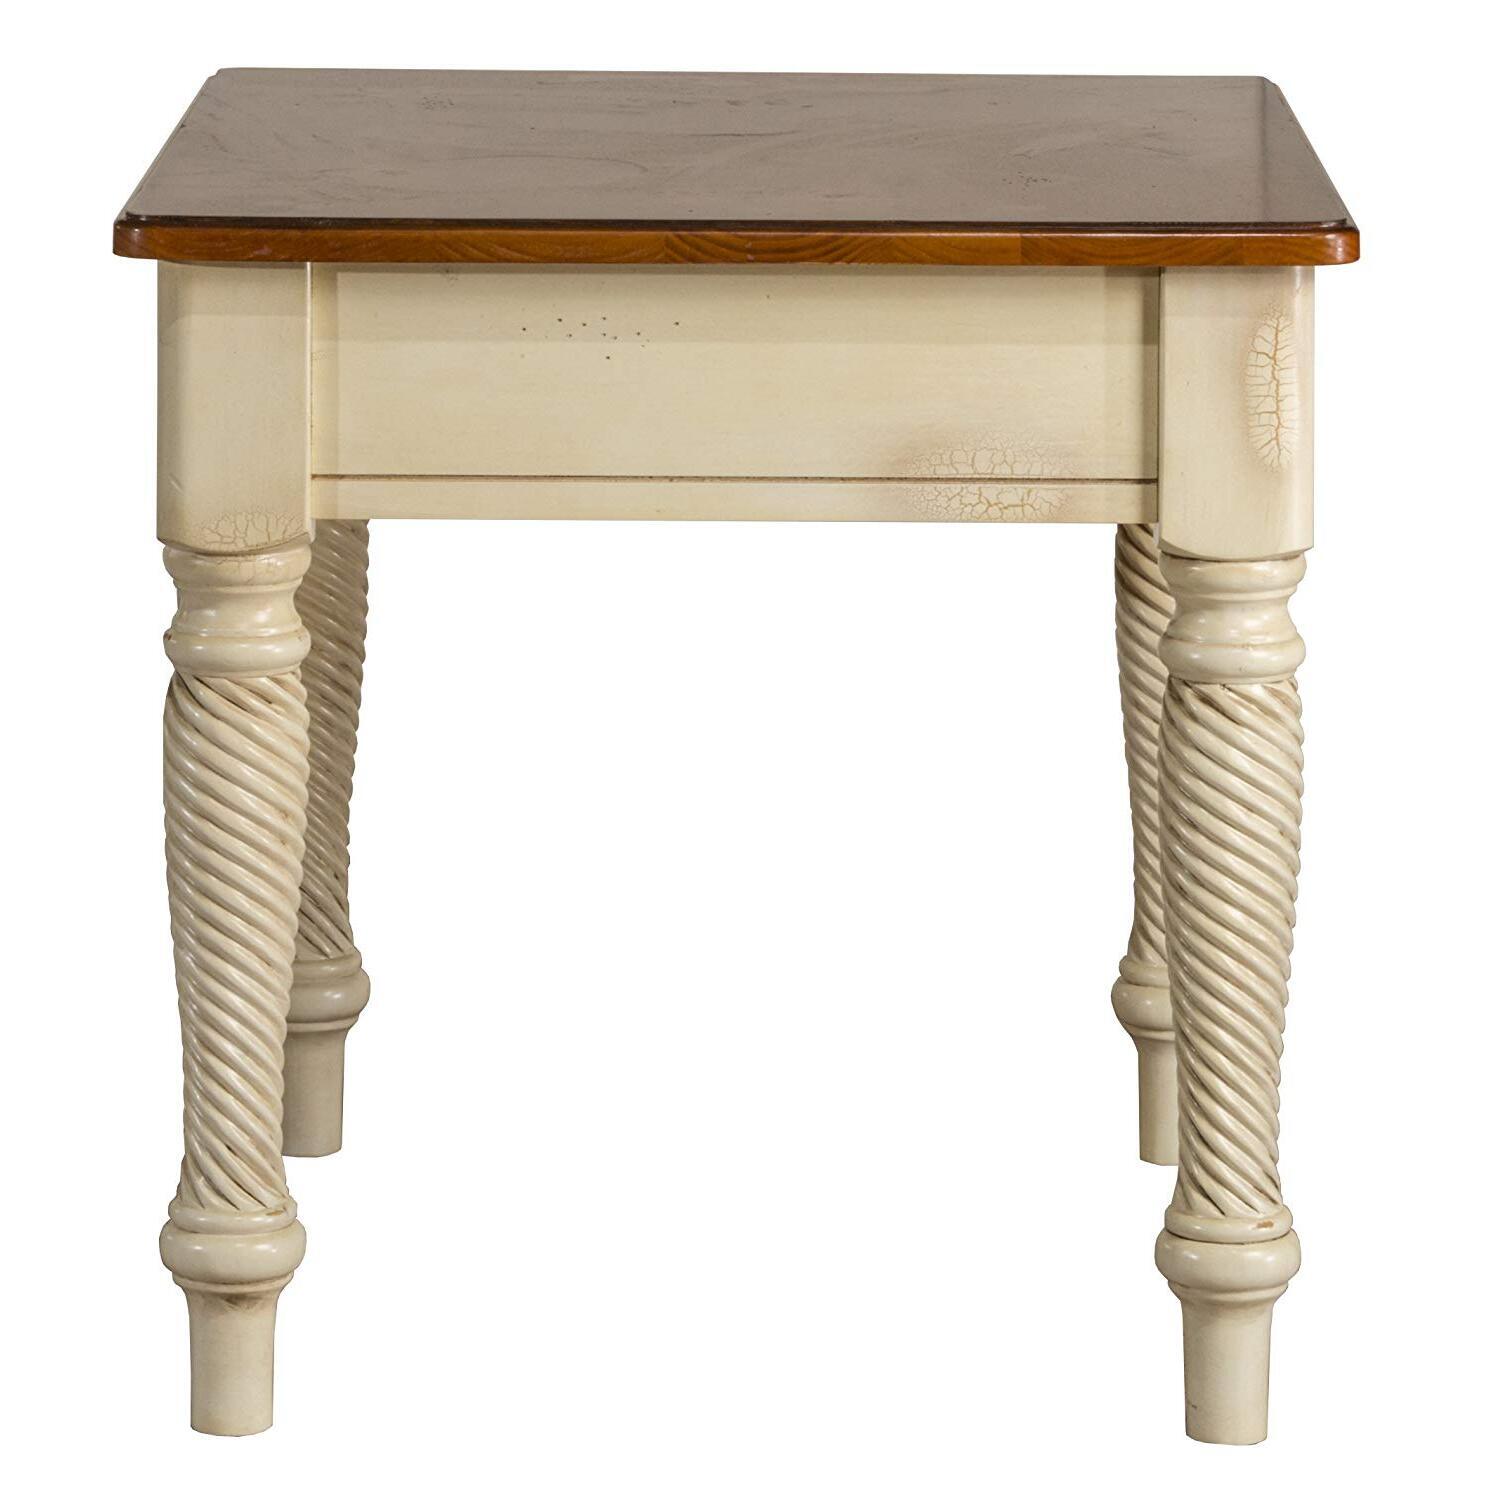 Hillsdale Furniture Wilshire End Table-Finish:Antique White - image 1 of 2